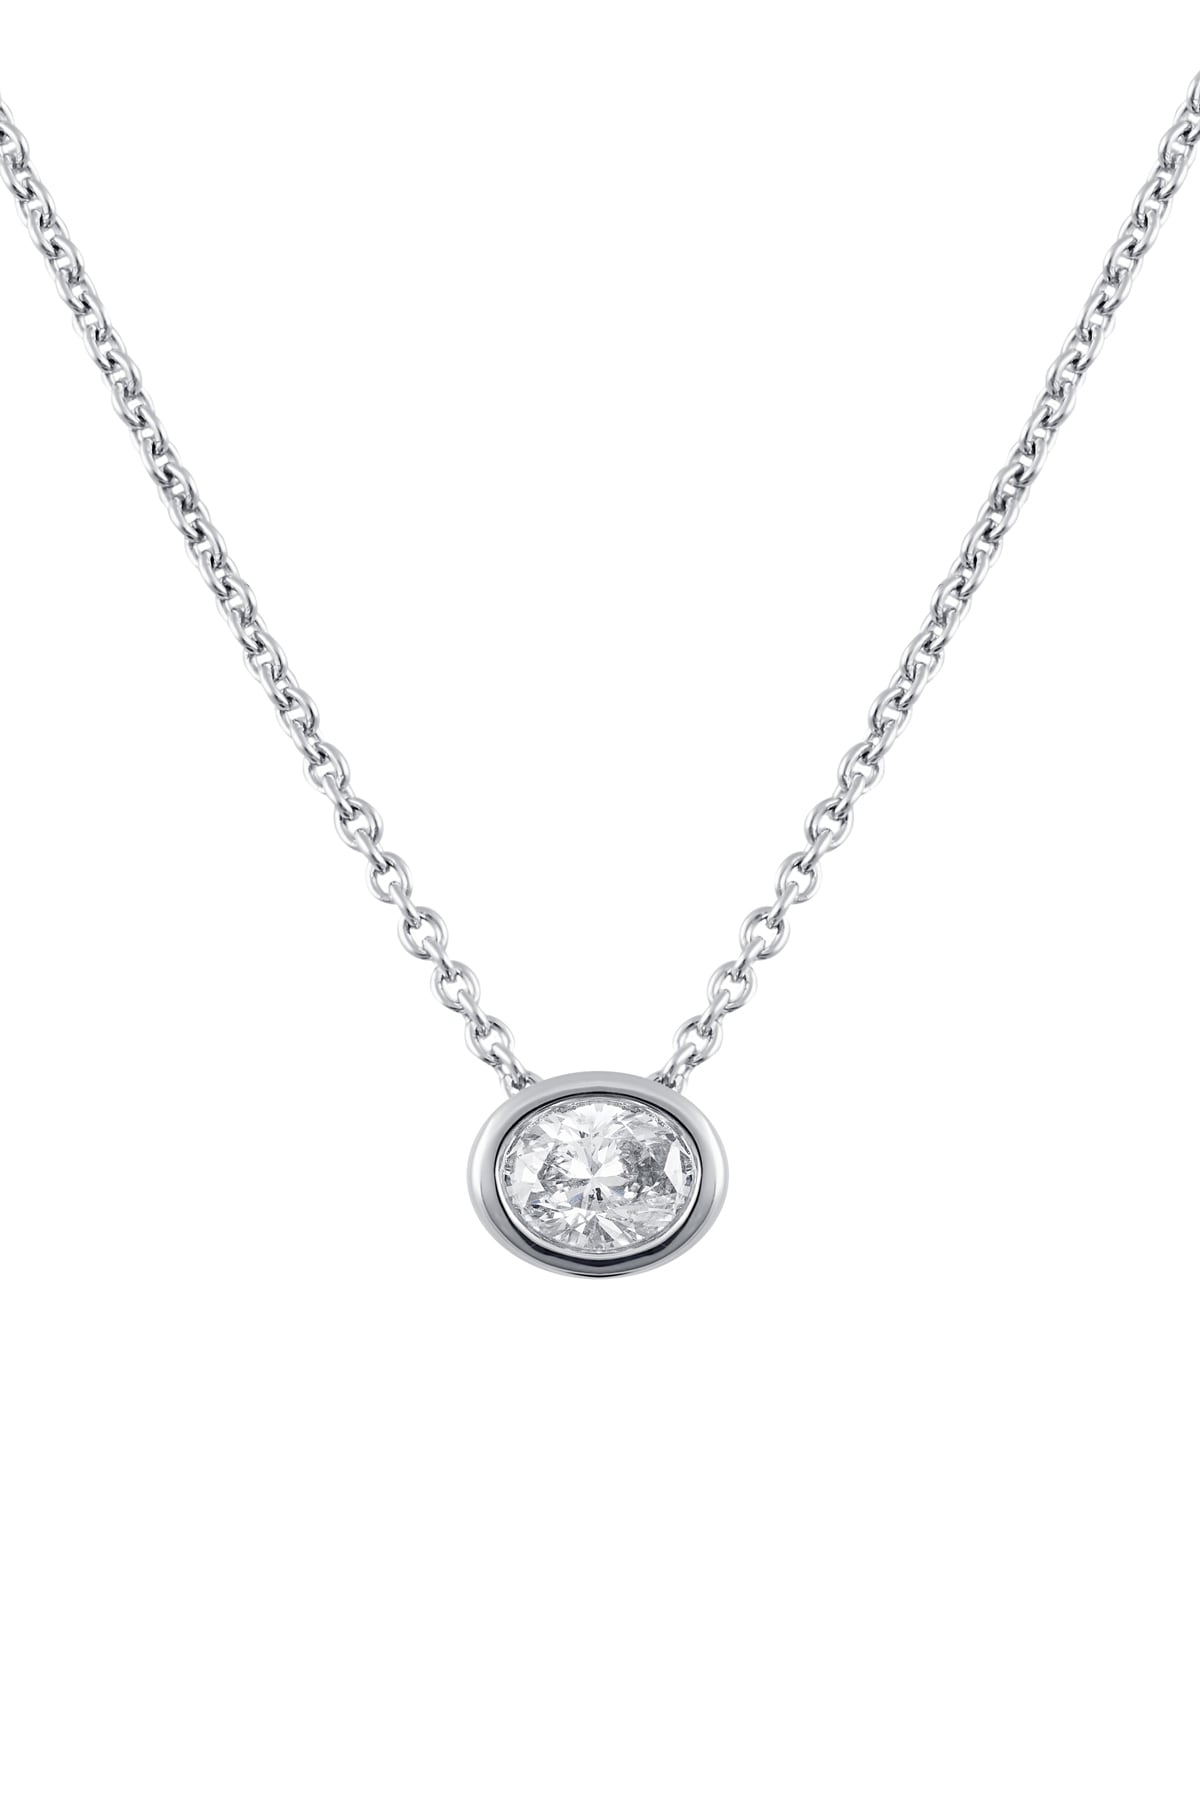 Oval Diamond Slider Pendant and Chain in 9ct White Gold from LeGassick Jewellery Gold Coast, Australia.